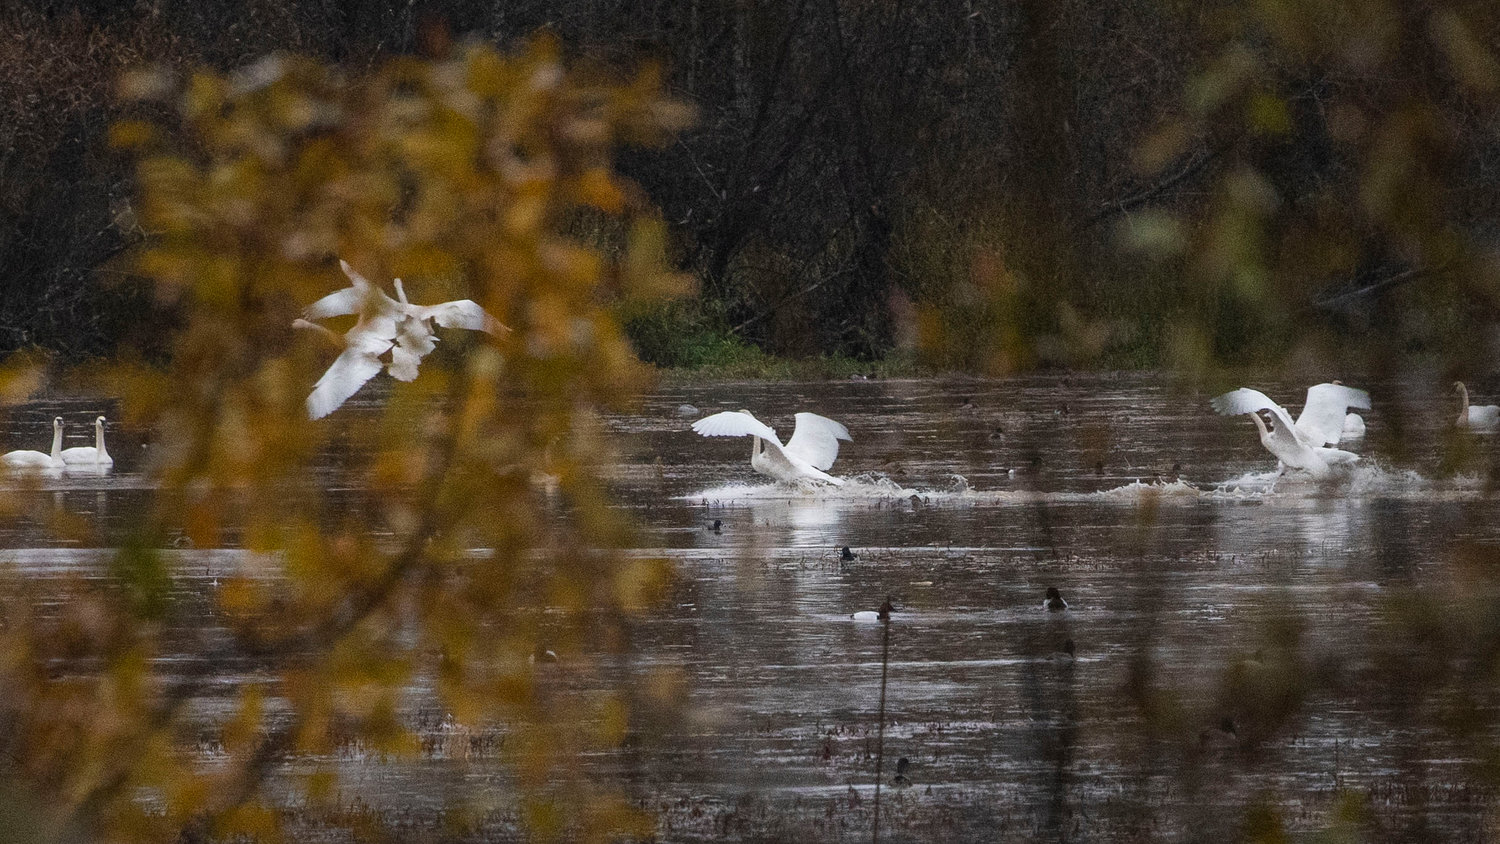 Swans glide to a splash landing over a pond near the Willapa Hills Trailhead on Friday in Chehalis.